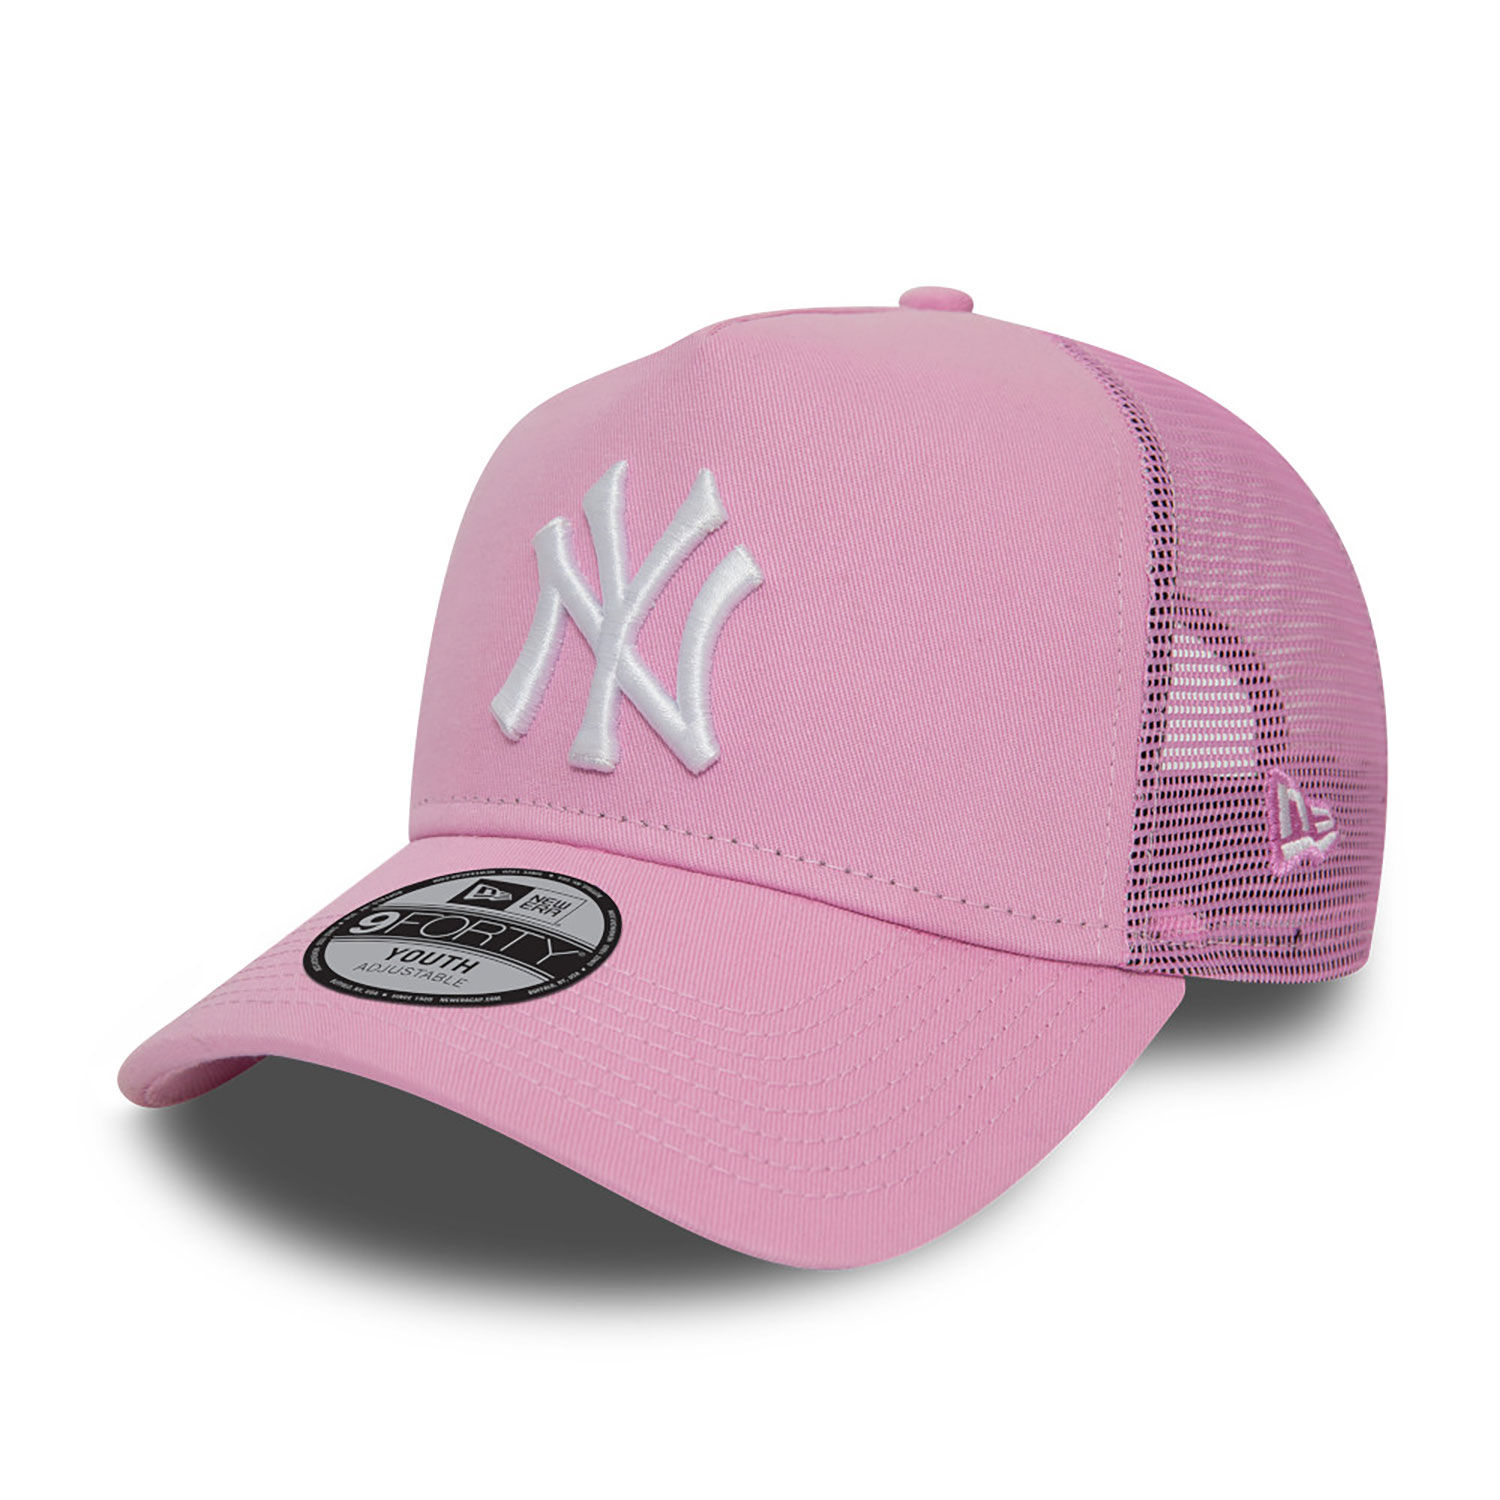 New York Yankees Youth League Essential Pink Trucker Cap